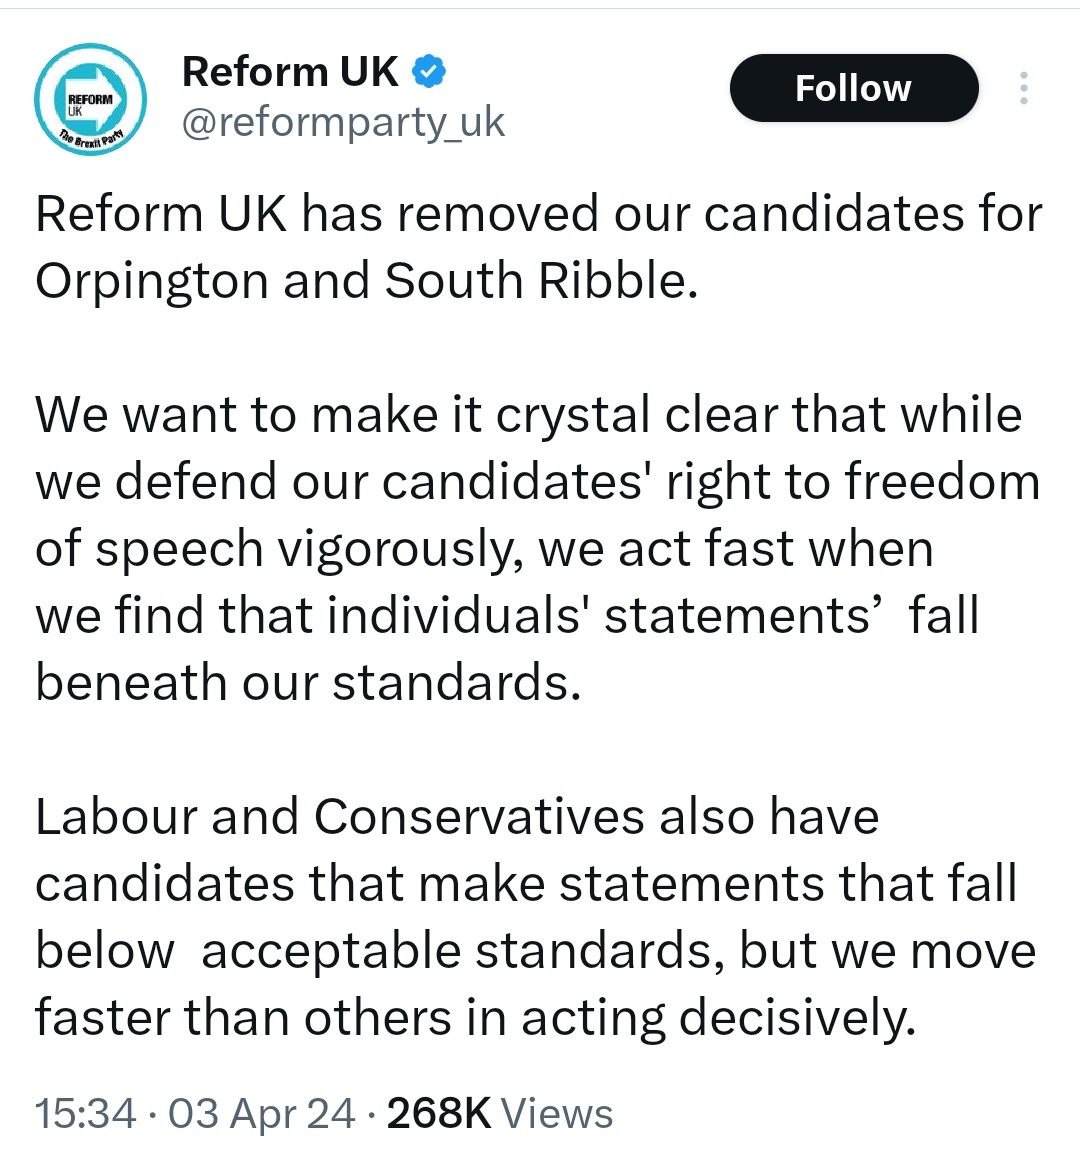 I don't think it is the case that the Conservatives, Labour, LibDems or SNP have kept candidates who have crossed the ĺine of the 7 Reform candidates recently suspended for overt racism